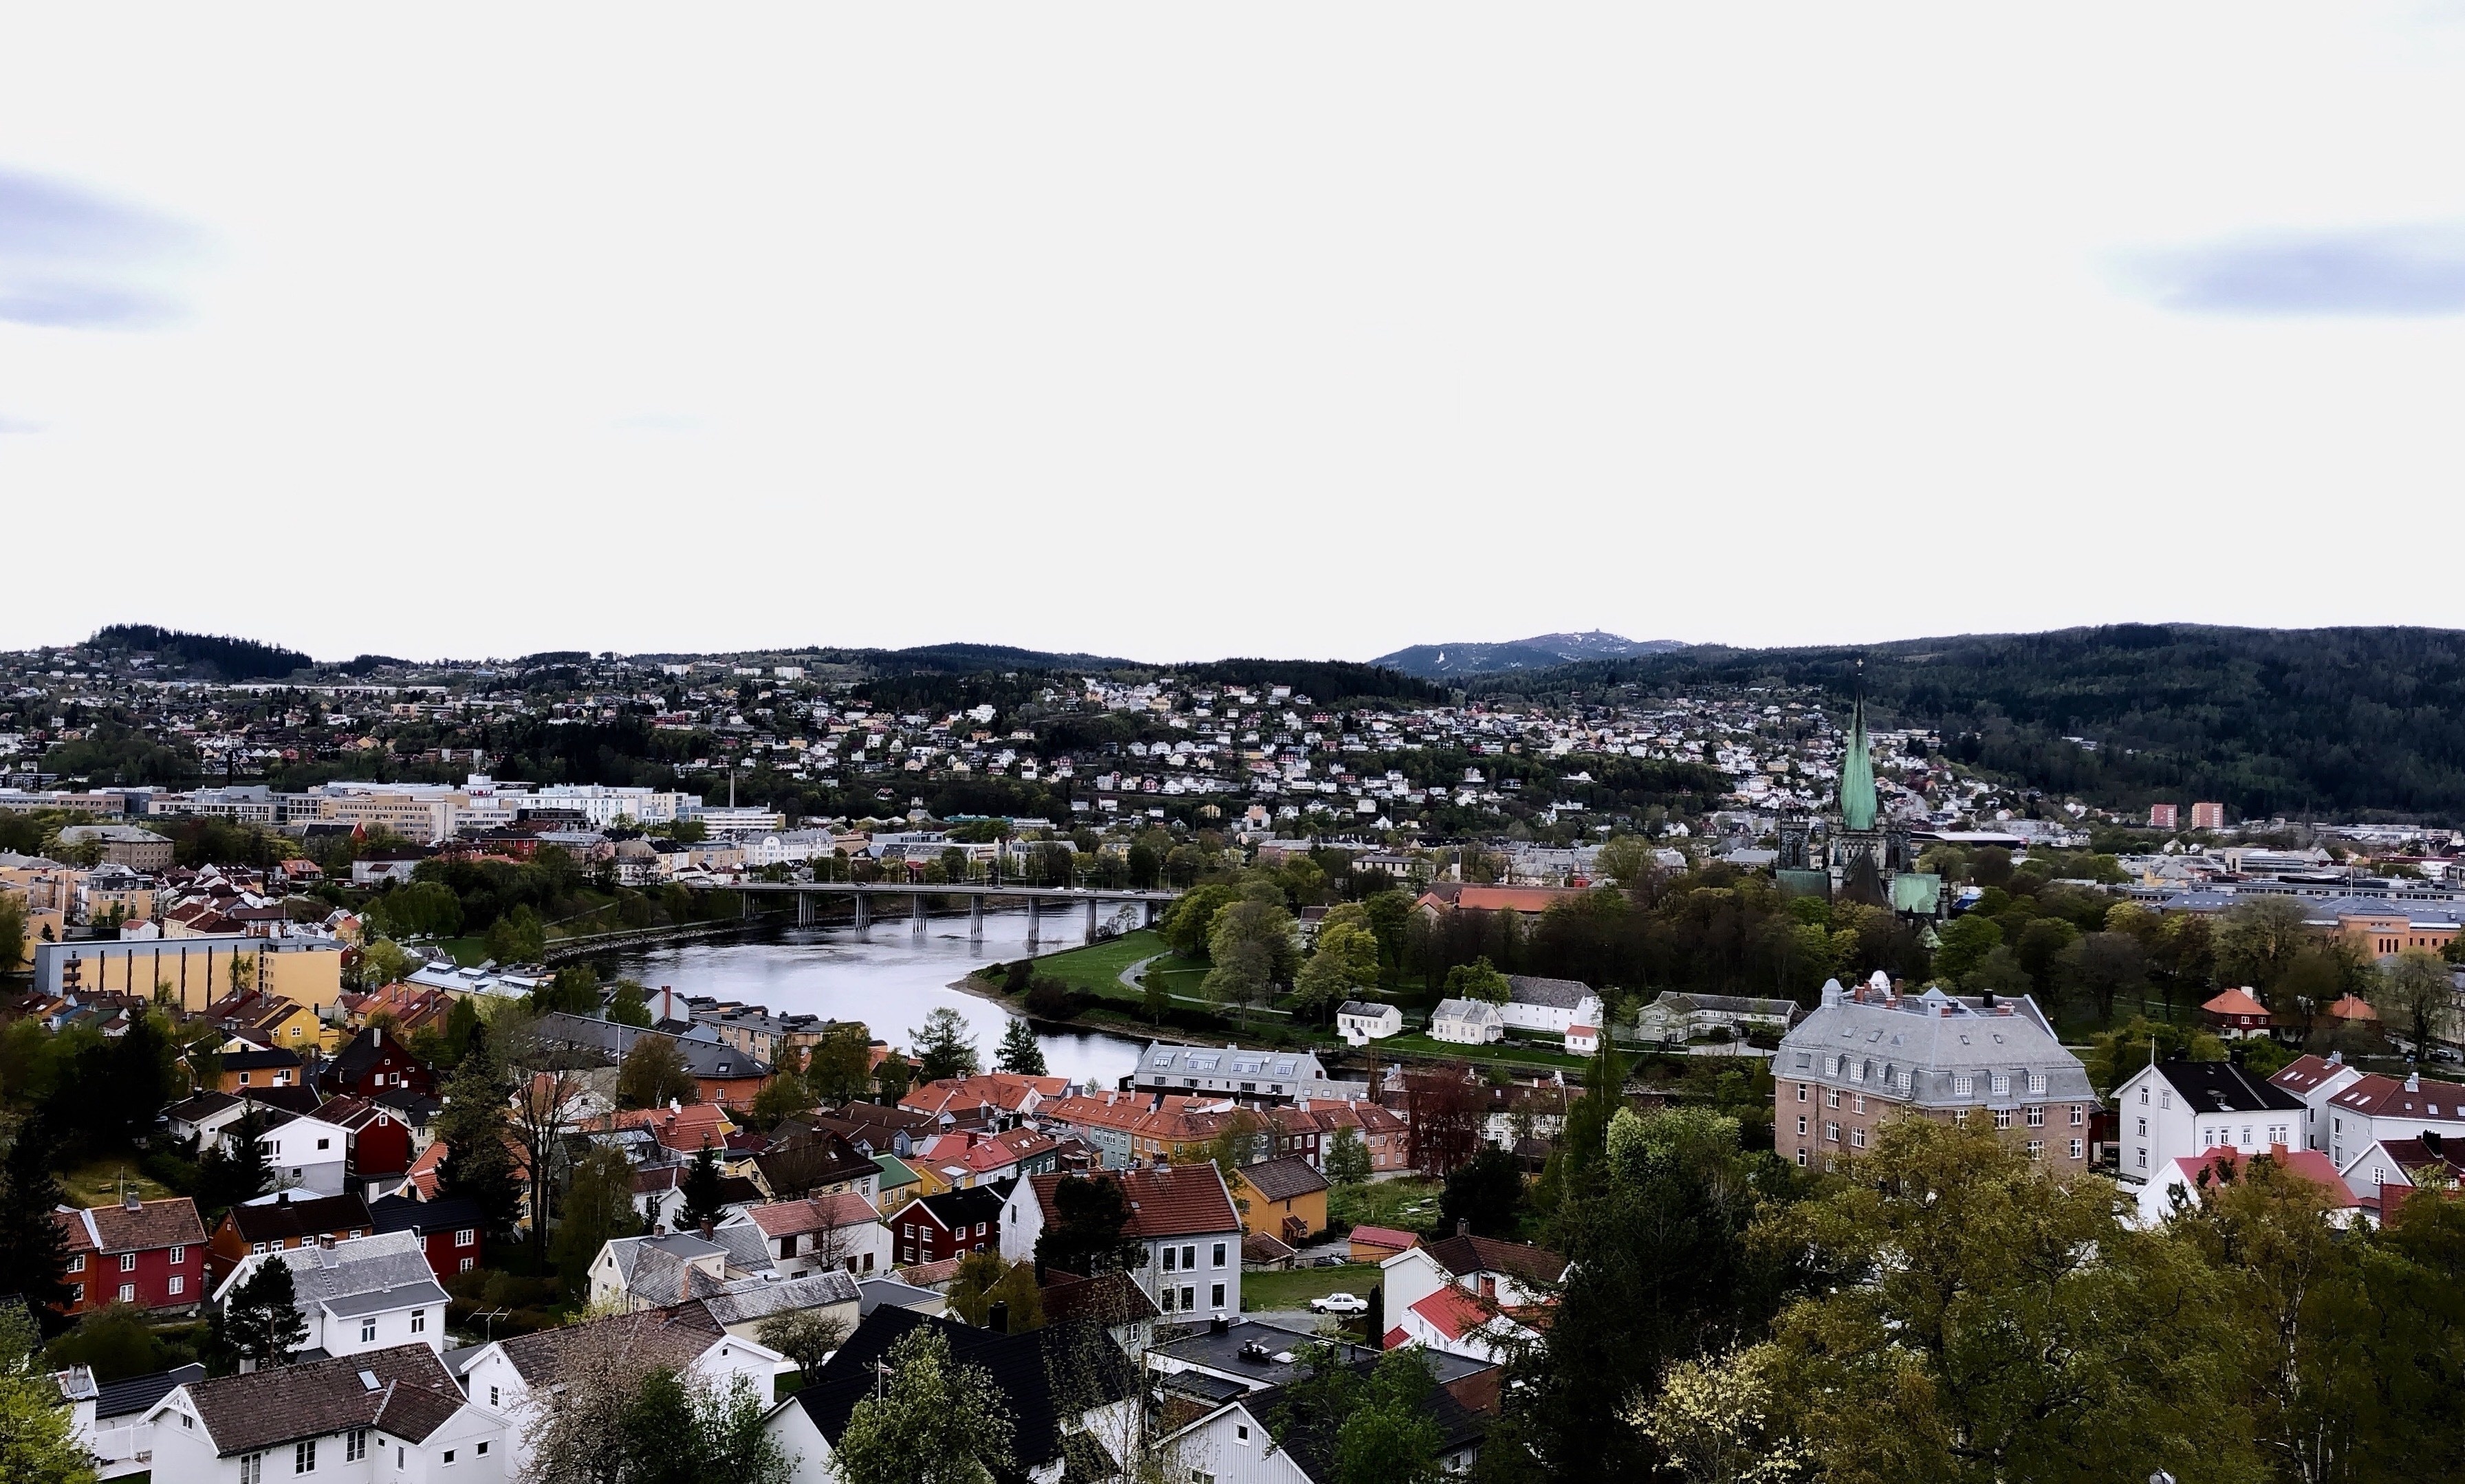 City view from the fortress. #norway